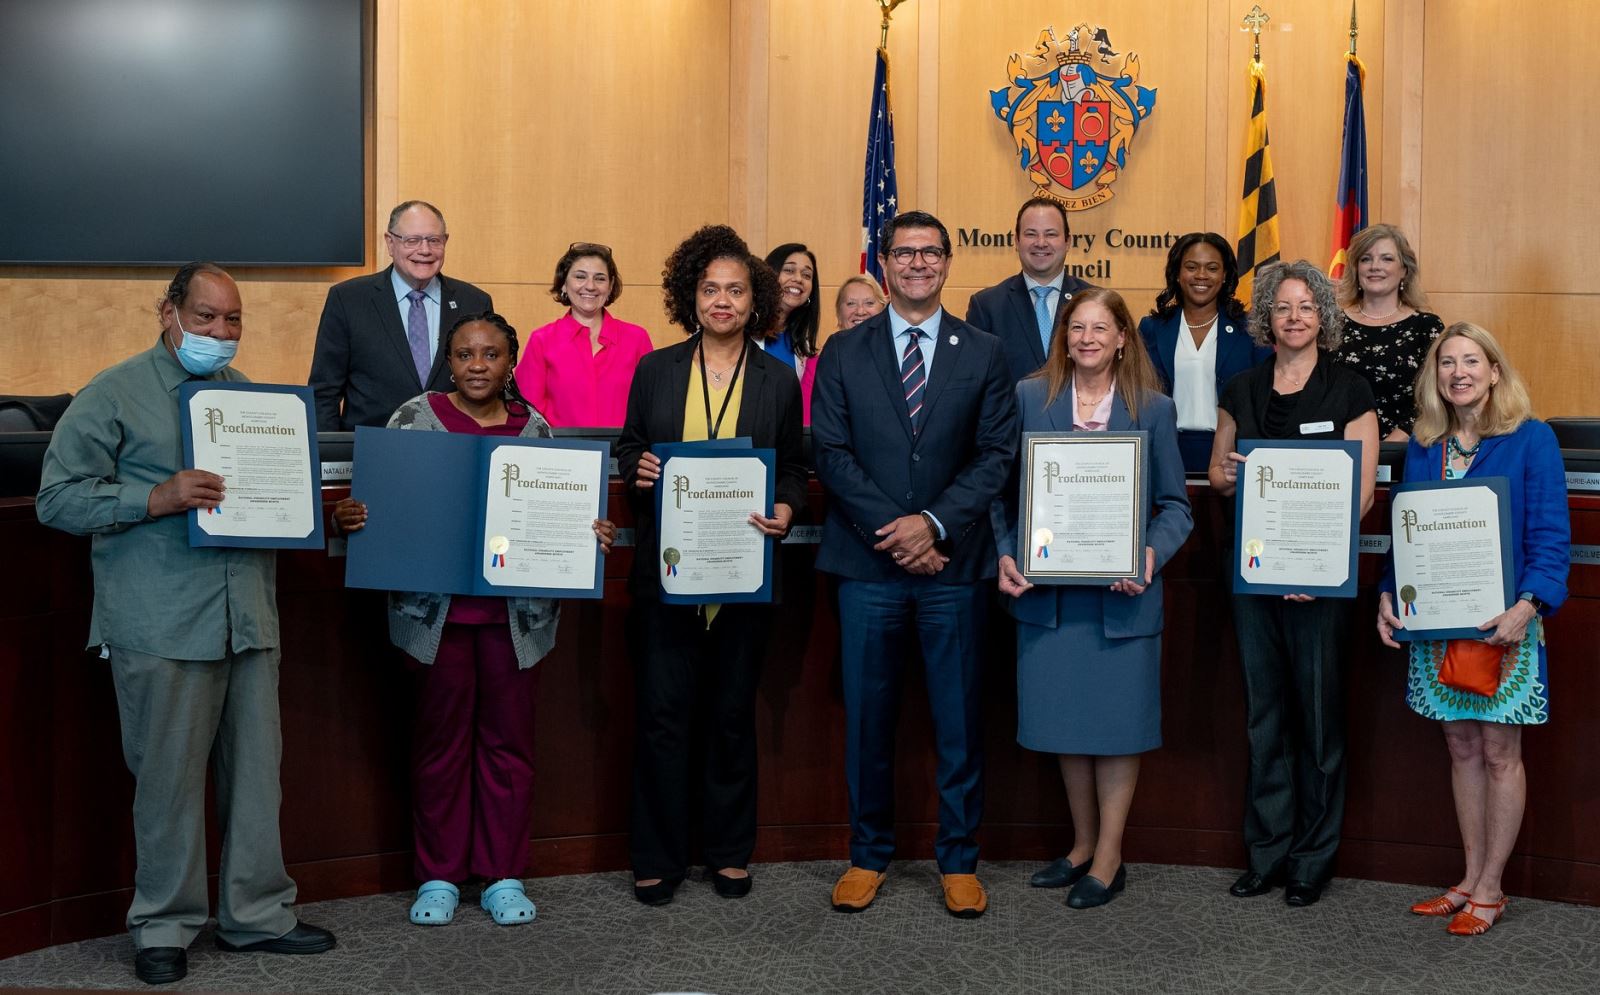 October is National Disability Employment Awareness Month. Commission Vice-Chair Karen Morgret attended a proclamation announcement at the Montgomery County Council.